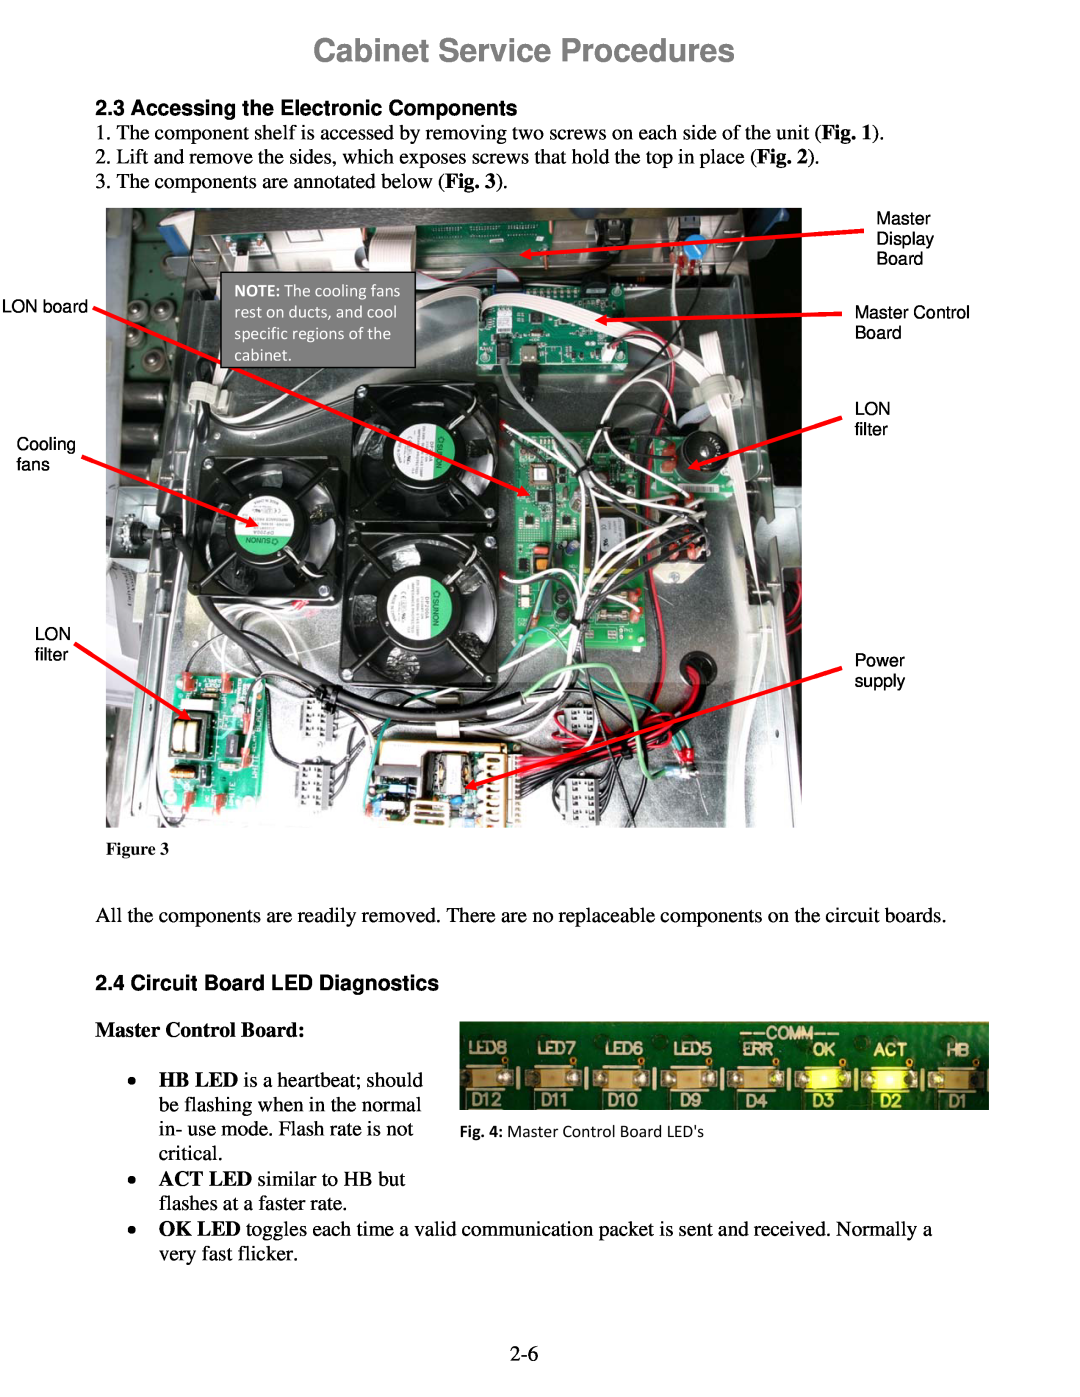 Frymaster UHC-HD manual Accessing the Electronic Components, Circuit Board LED Diagnostics, Cabinet Service Procedures 